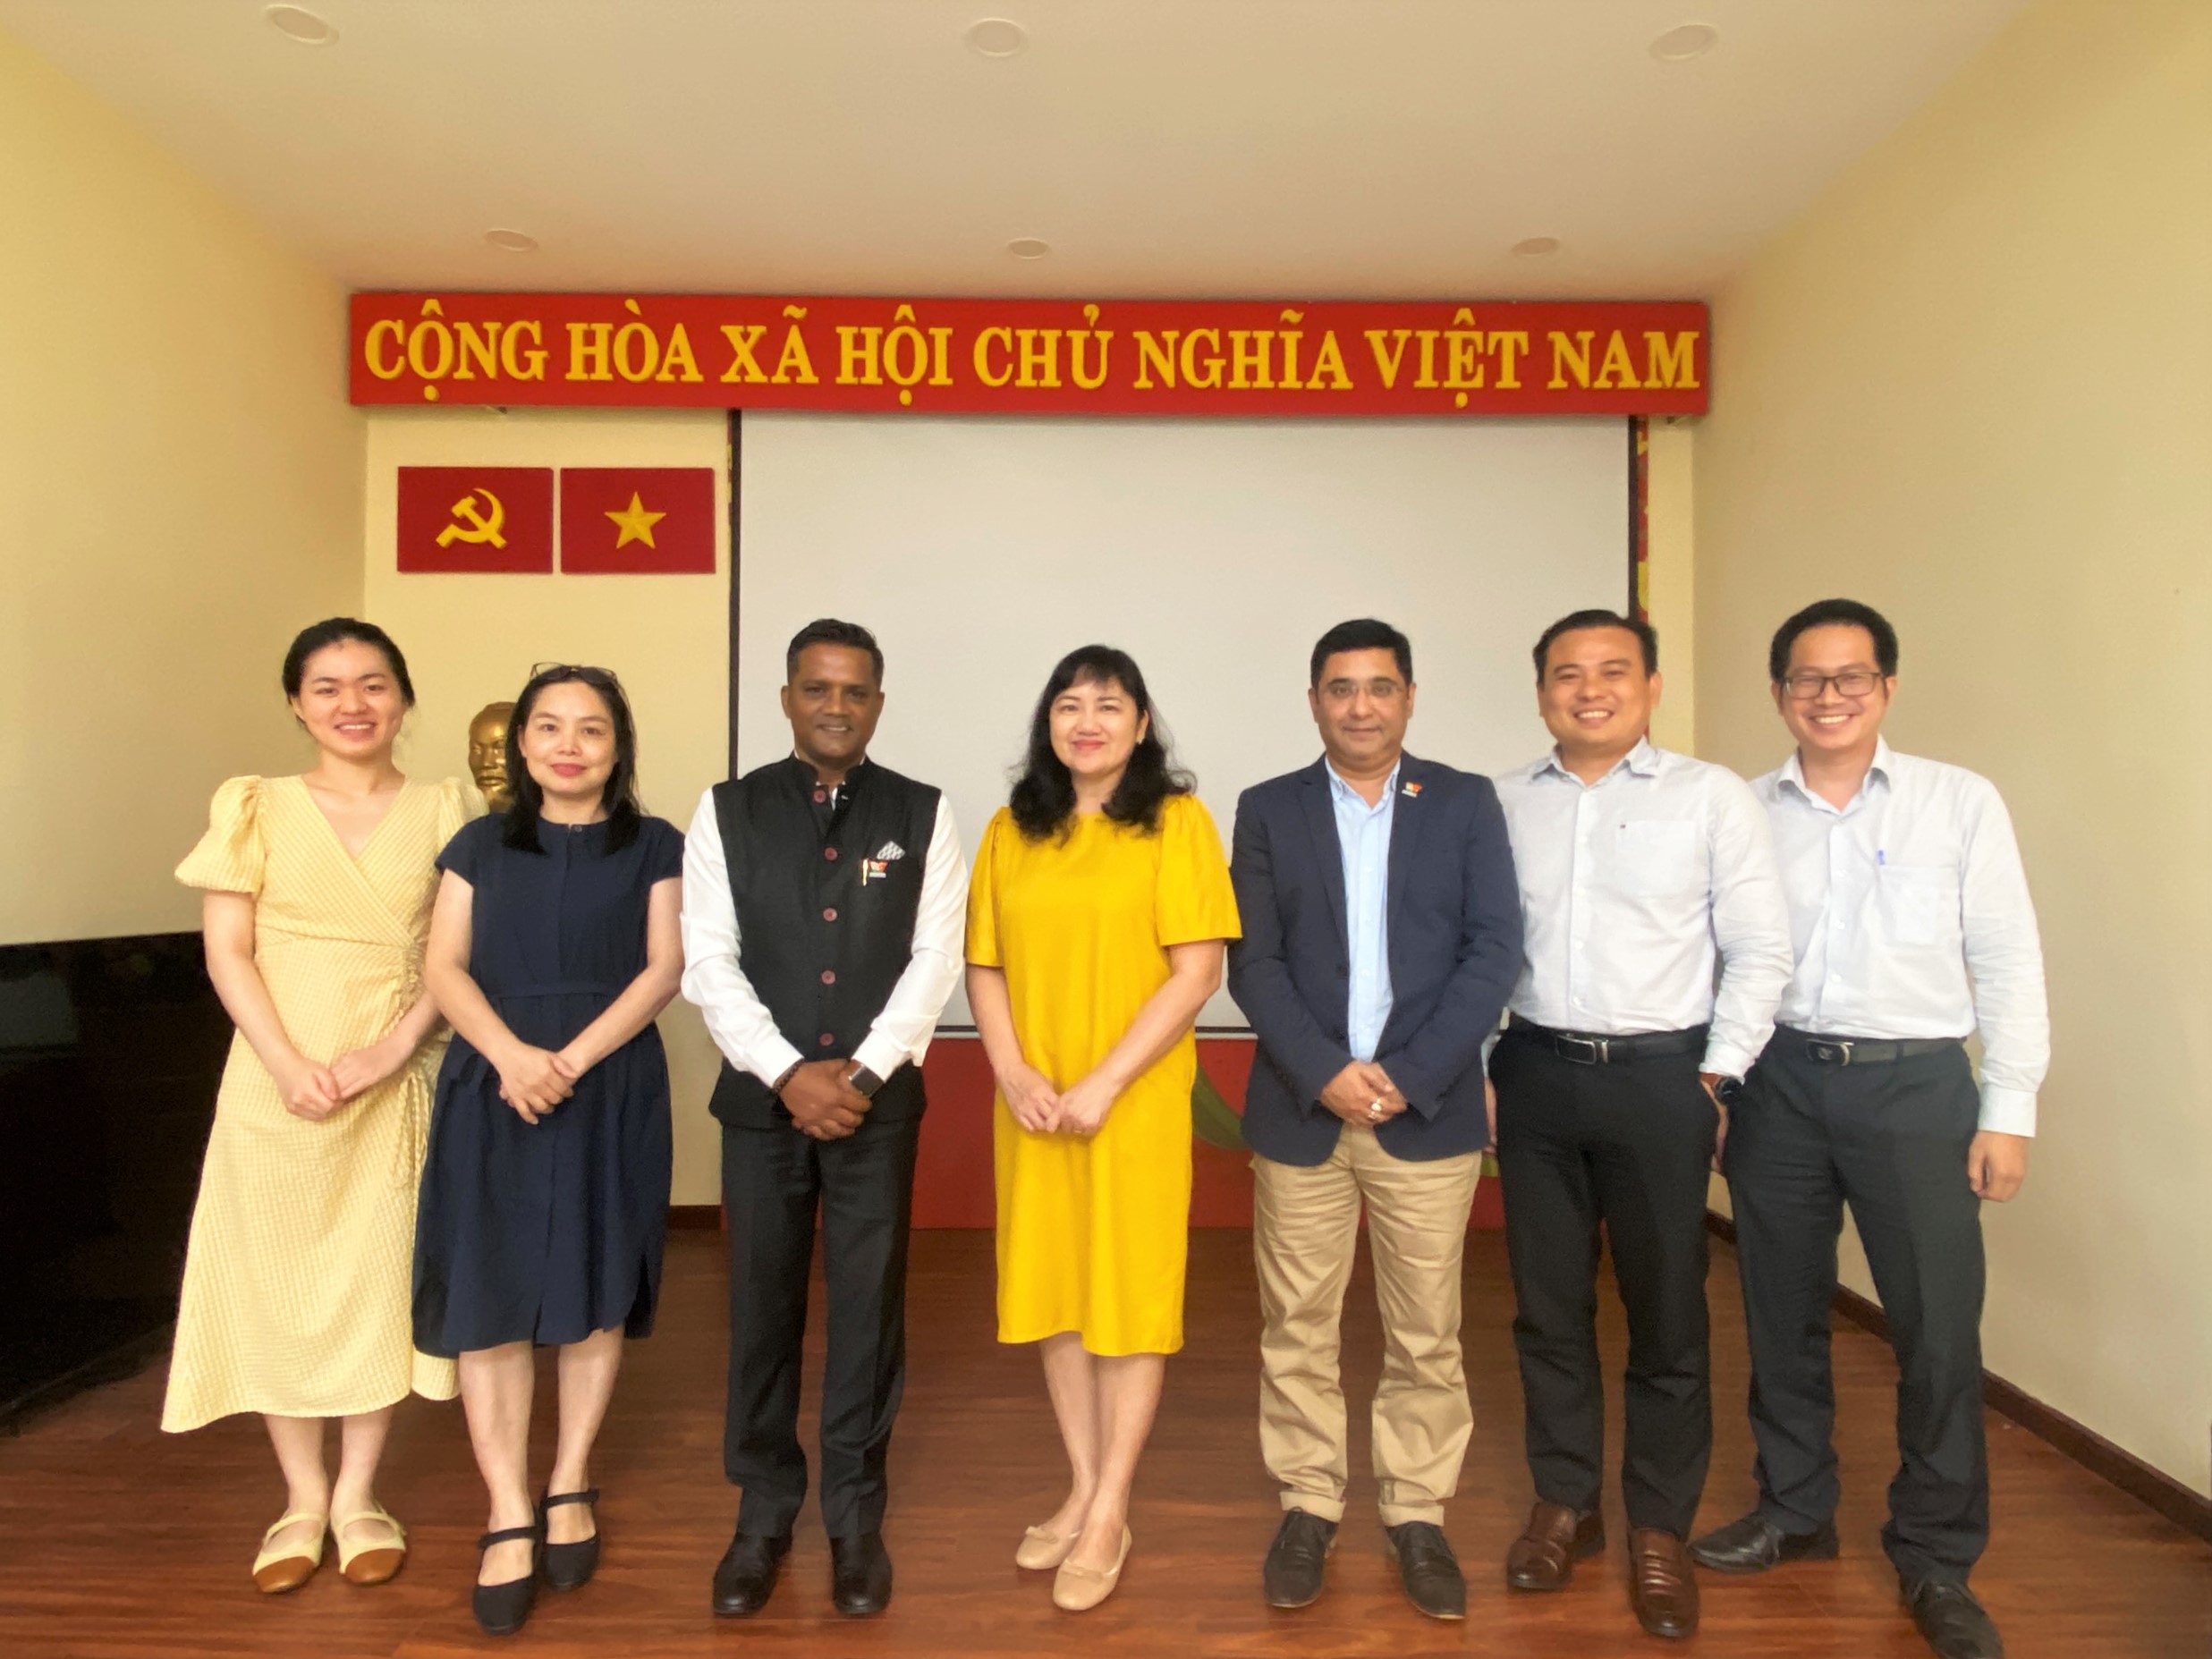 MEETING WITH HCMC INVESTMENT AND TRADE PROMOTION CENTER (ITPC)